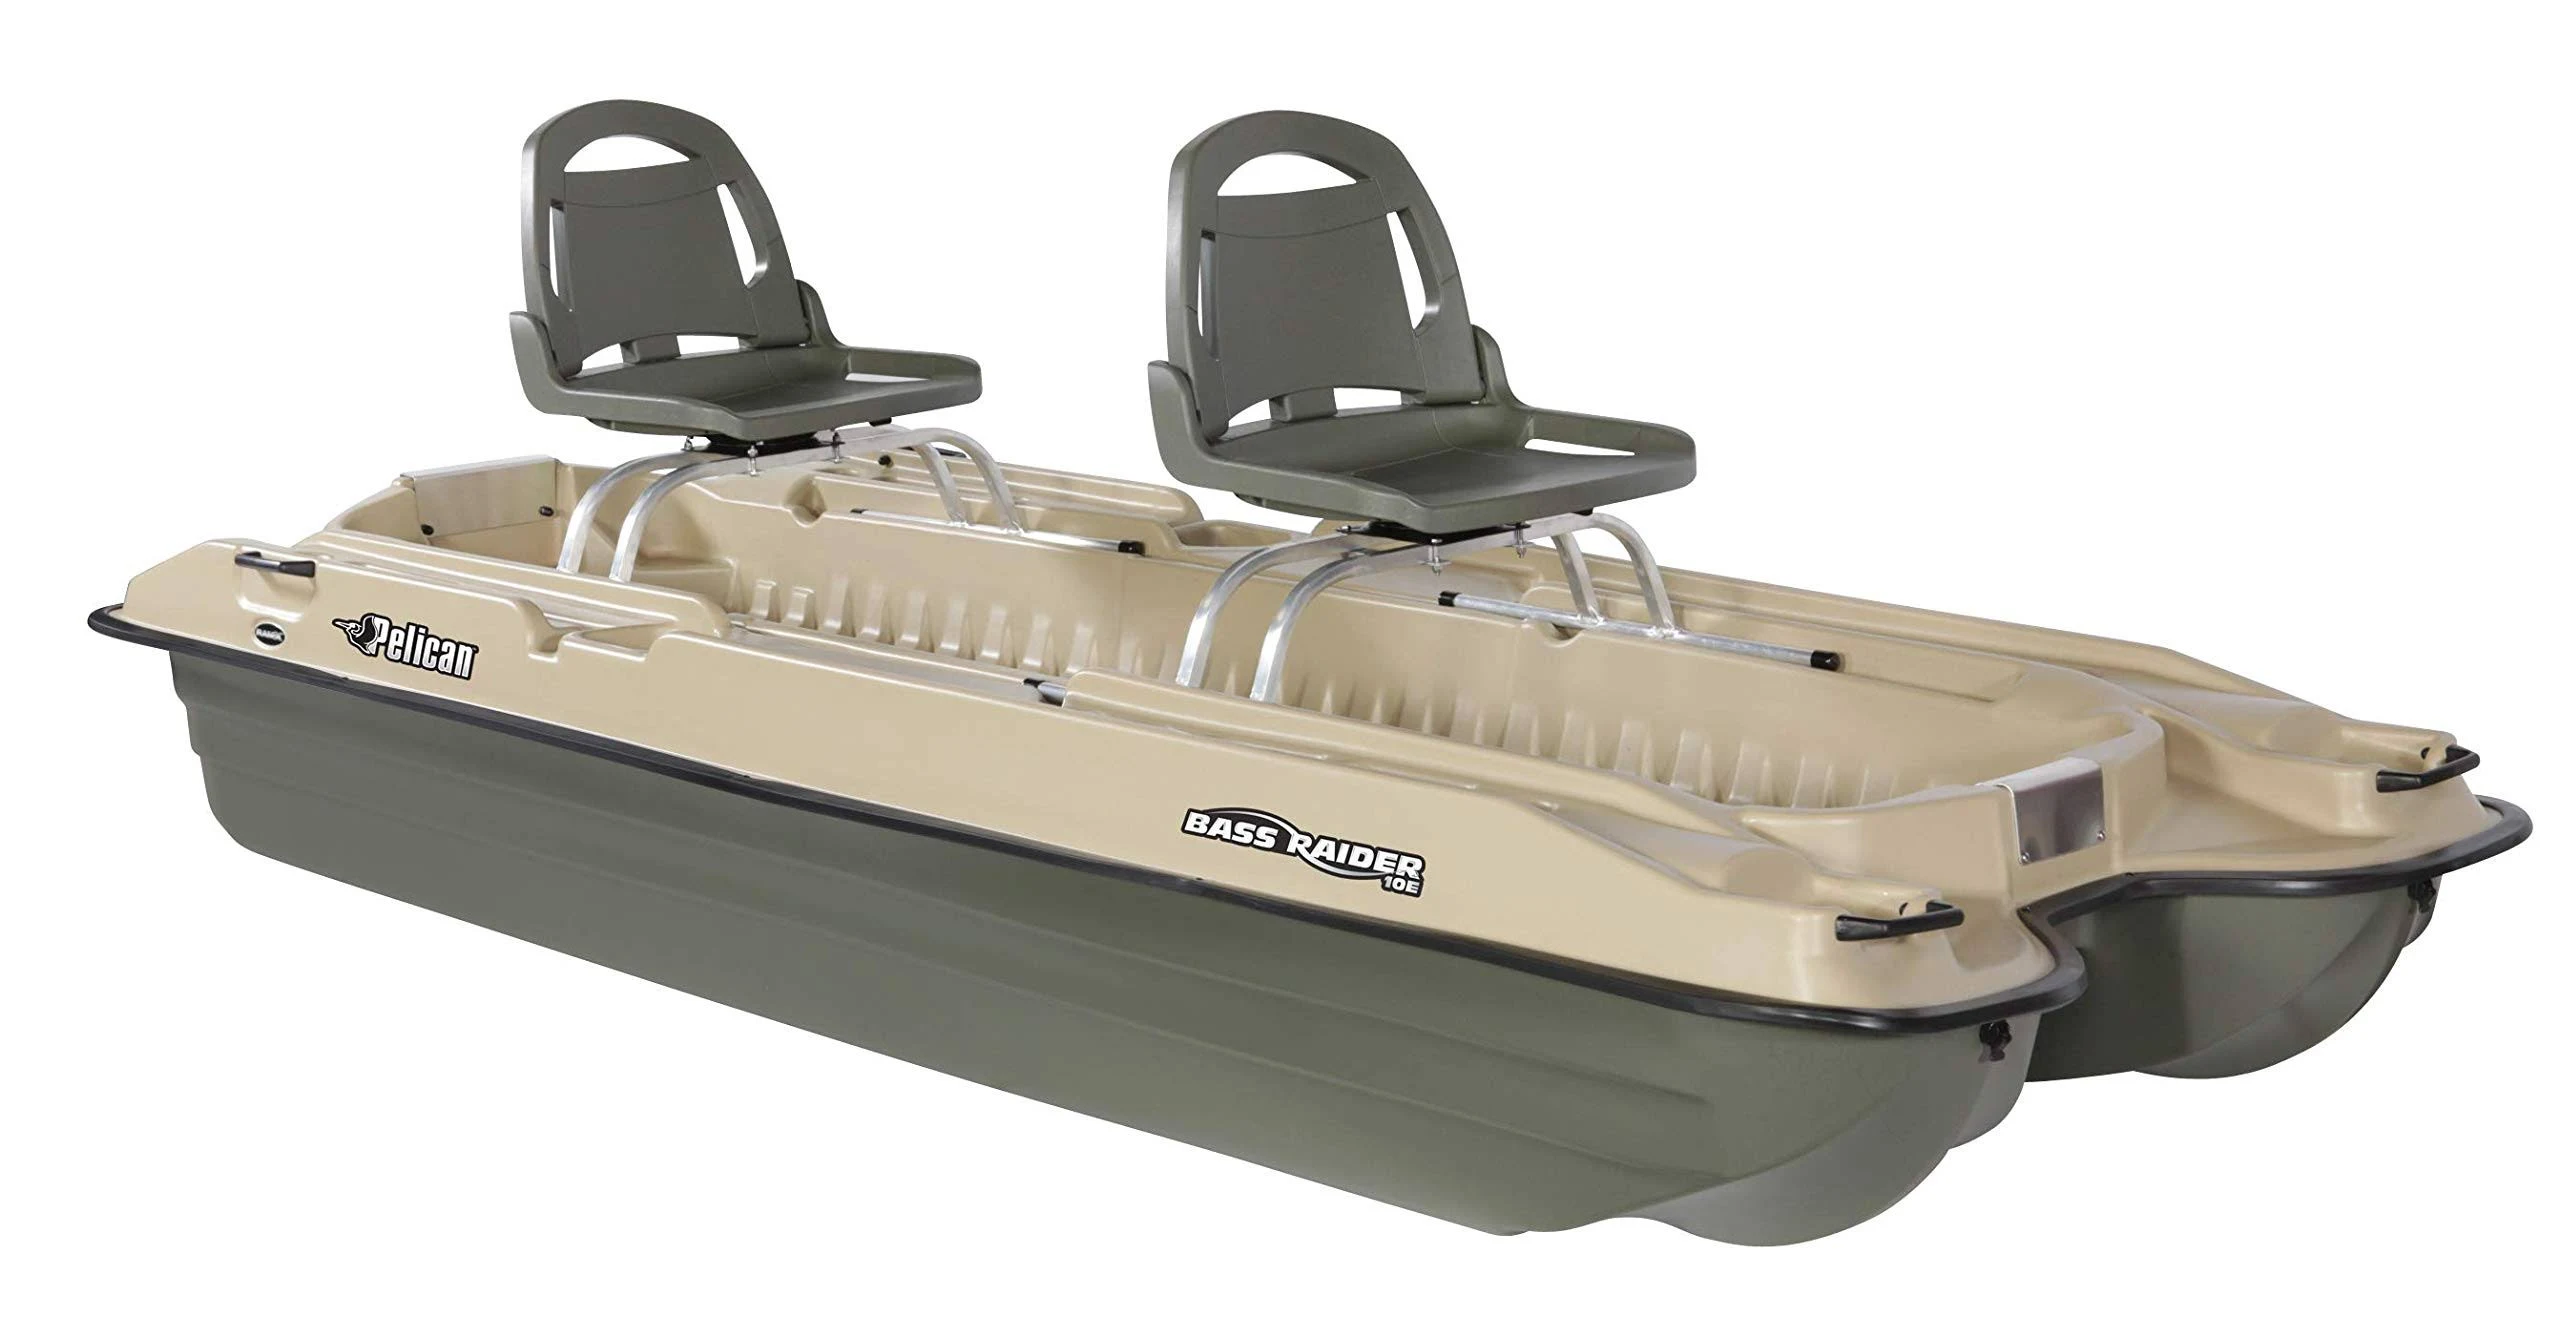 Pelican Bass Raider Boat – 2 Person Fishing Boat – 10 ft, Size: 122 inch x 50 inch x 20.75 inch